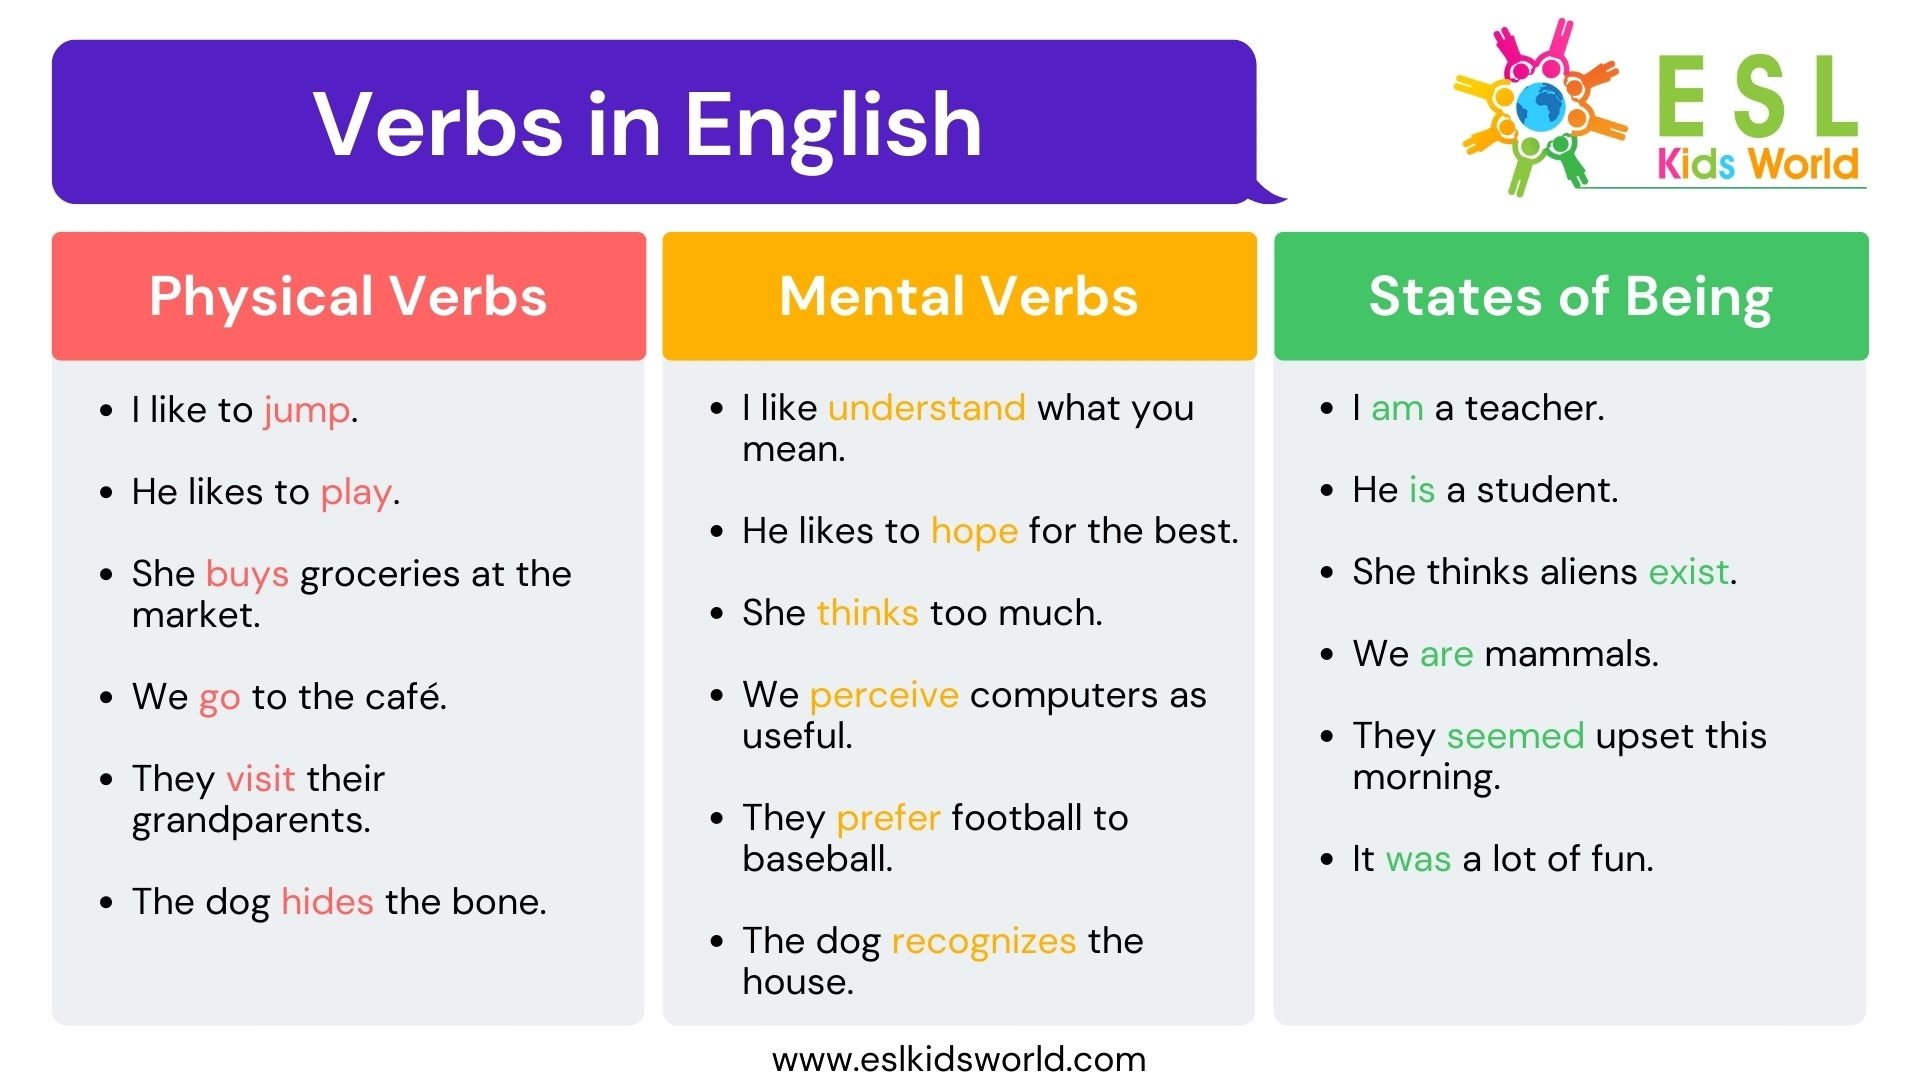 Verbs in English, What is a Verb?